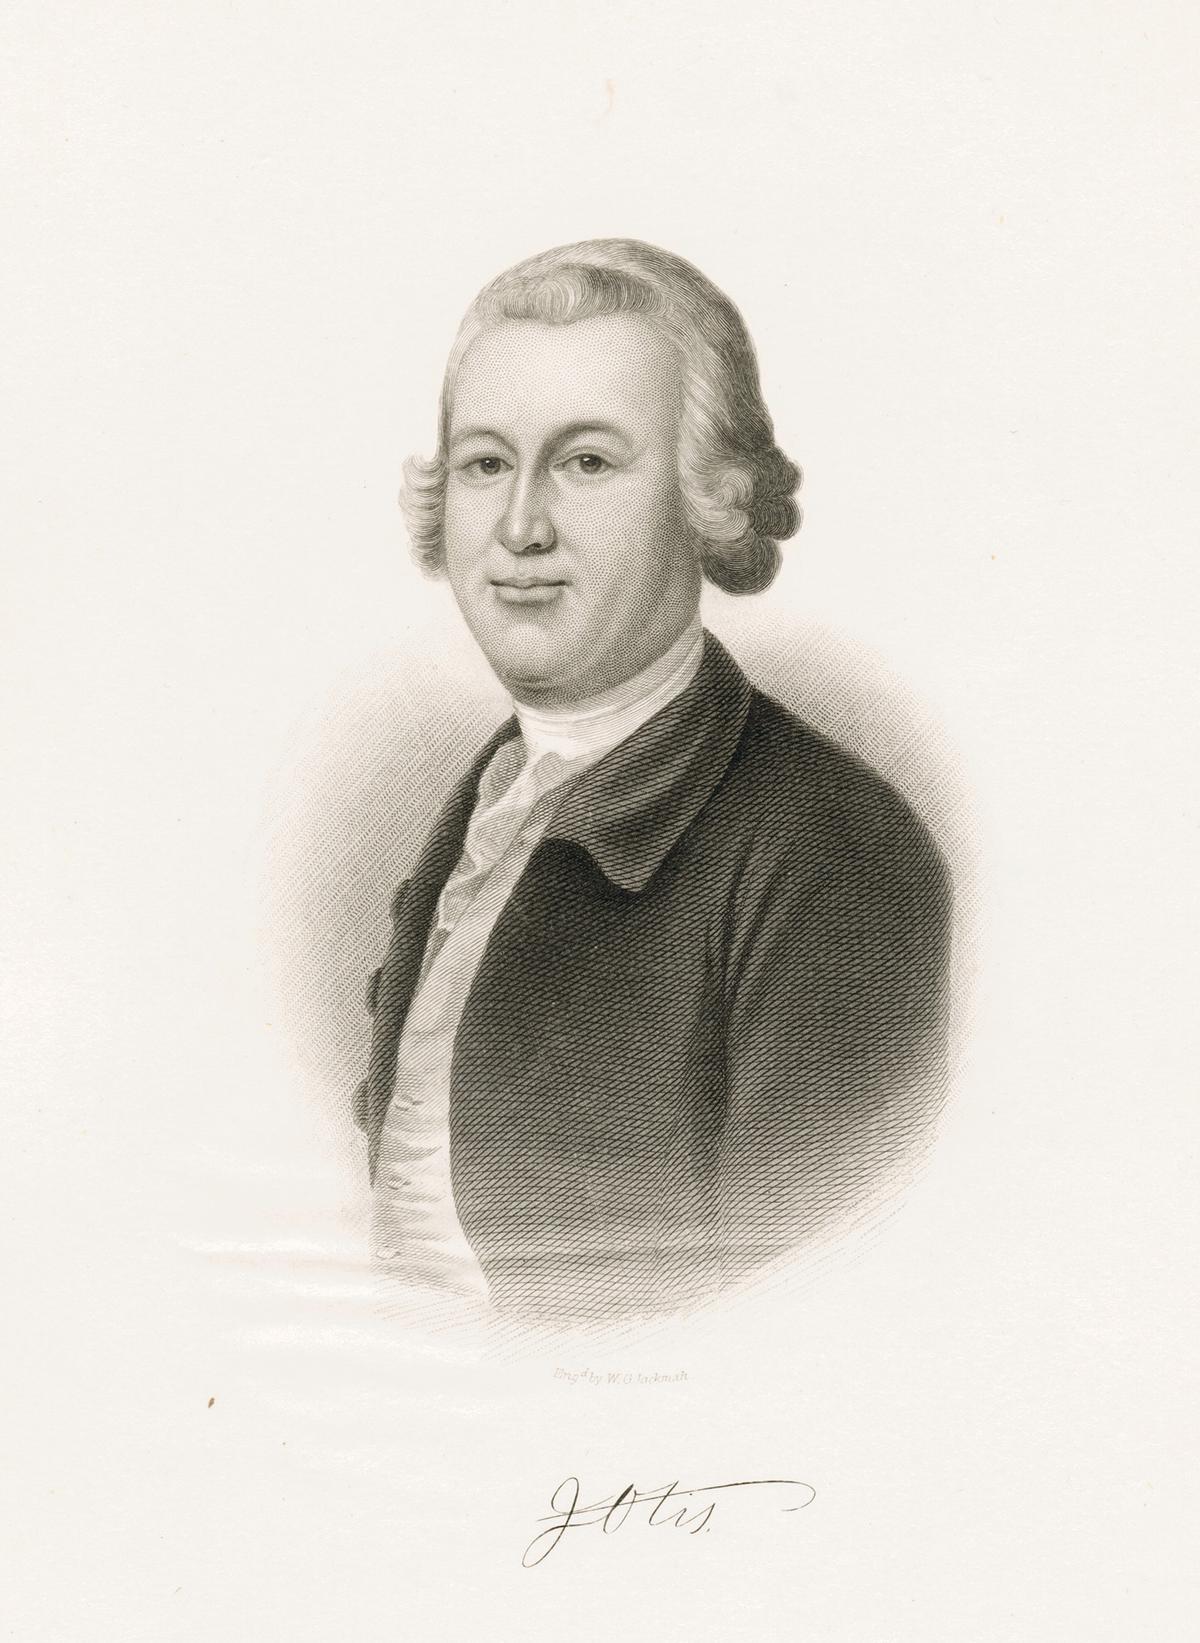 Warren's older brother James was an able mentor. A likeness of James Otis, after the painting by Blackburn. Emmet Collection of Manuscripts. (Public Domain)